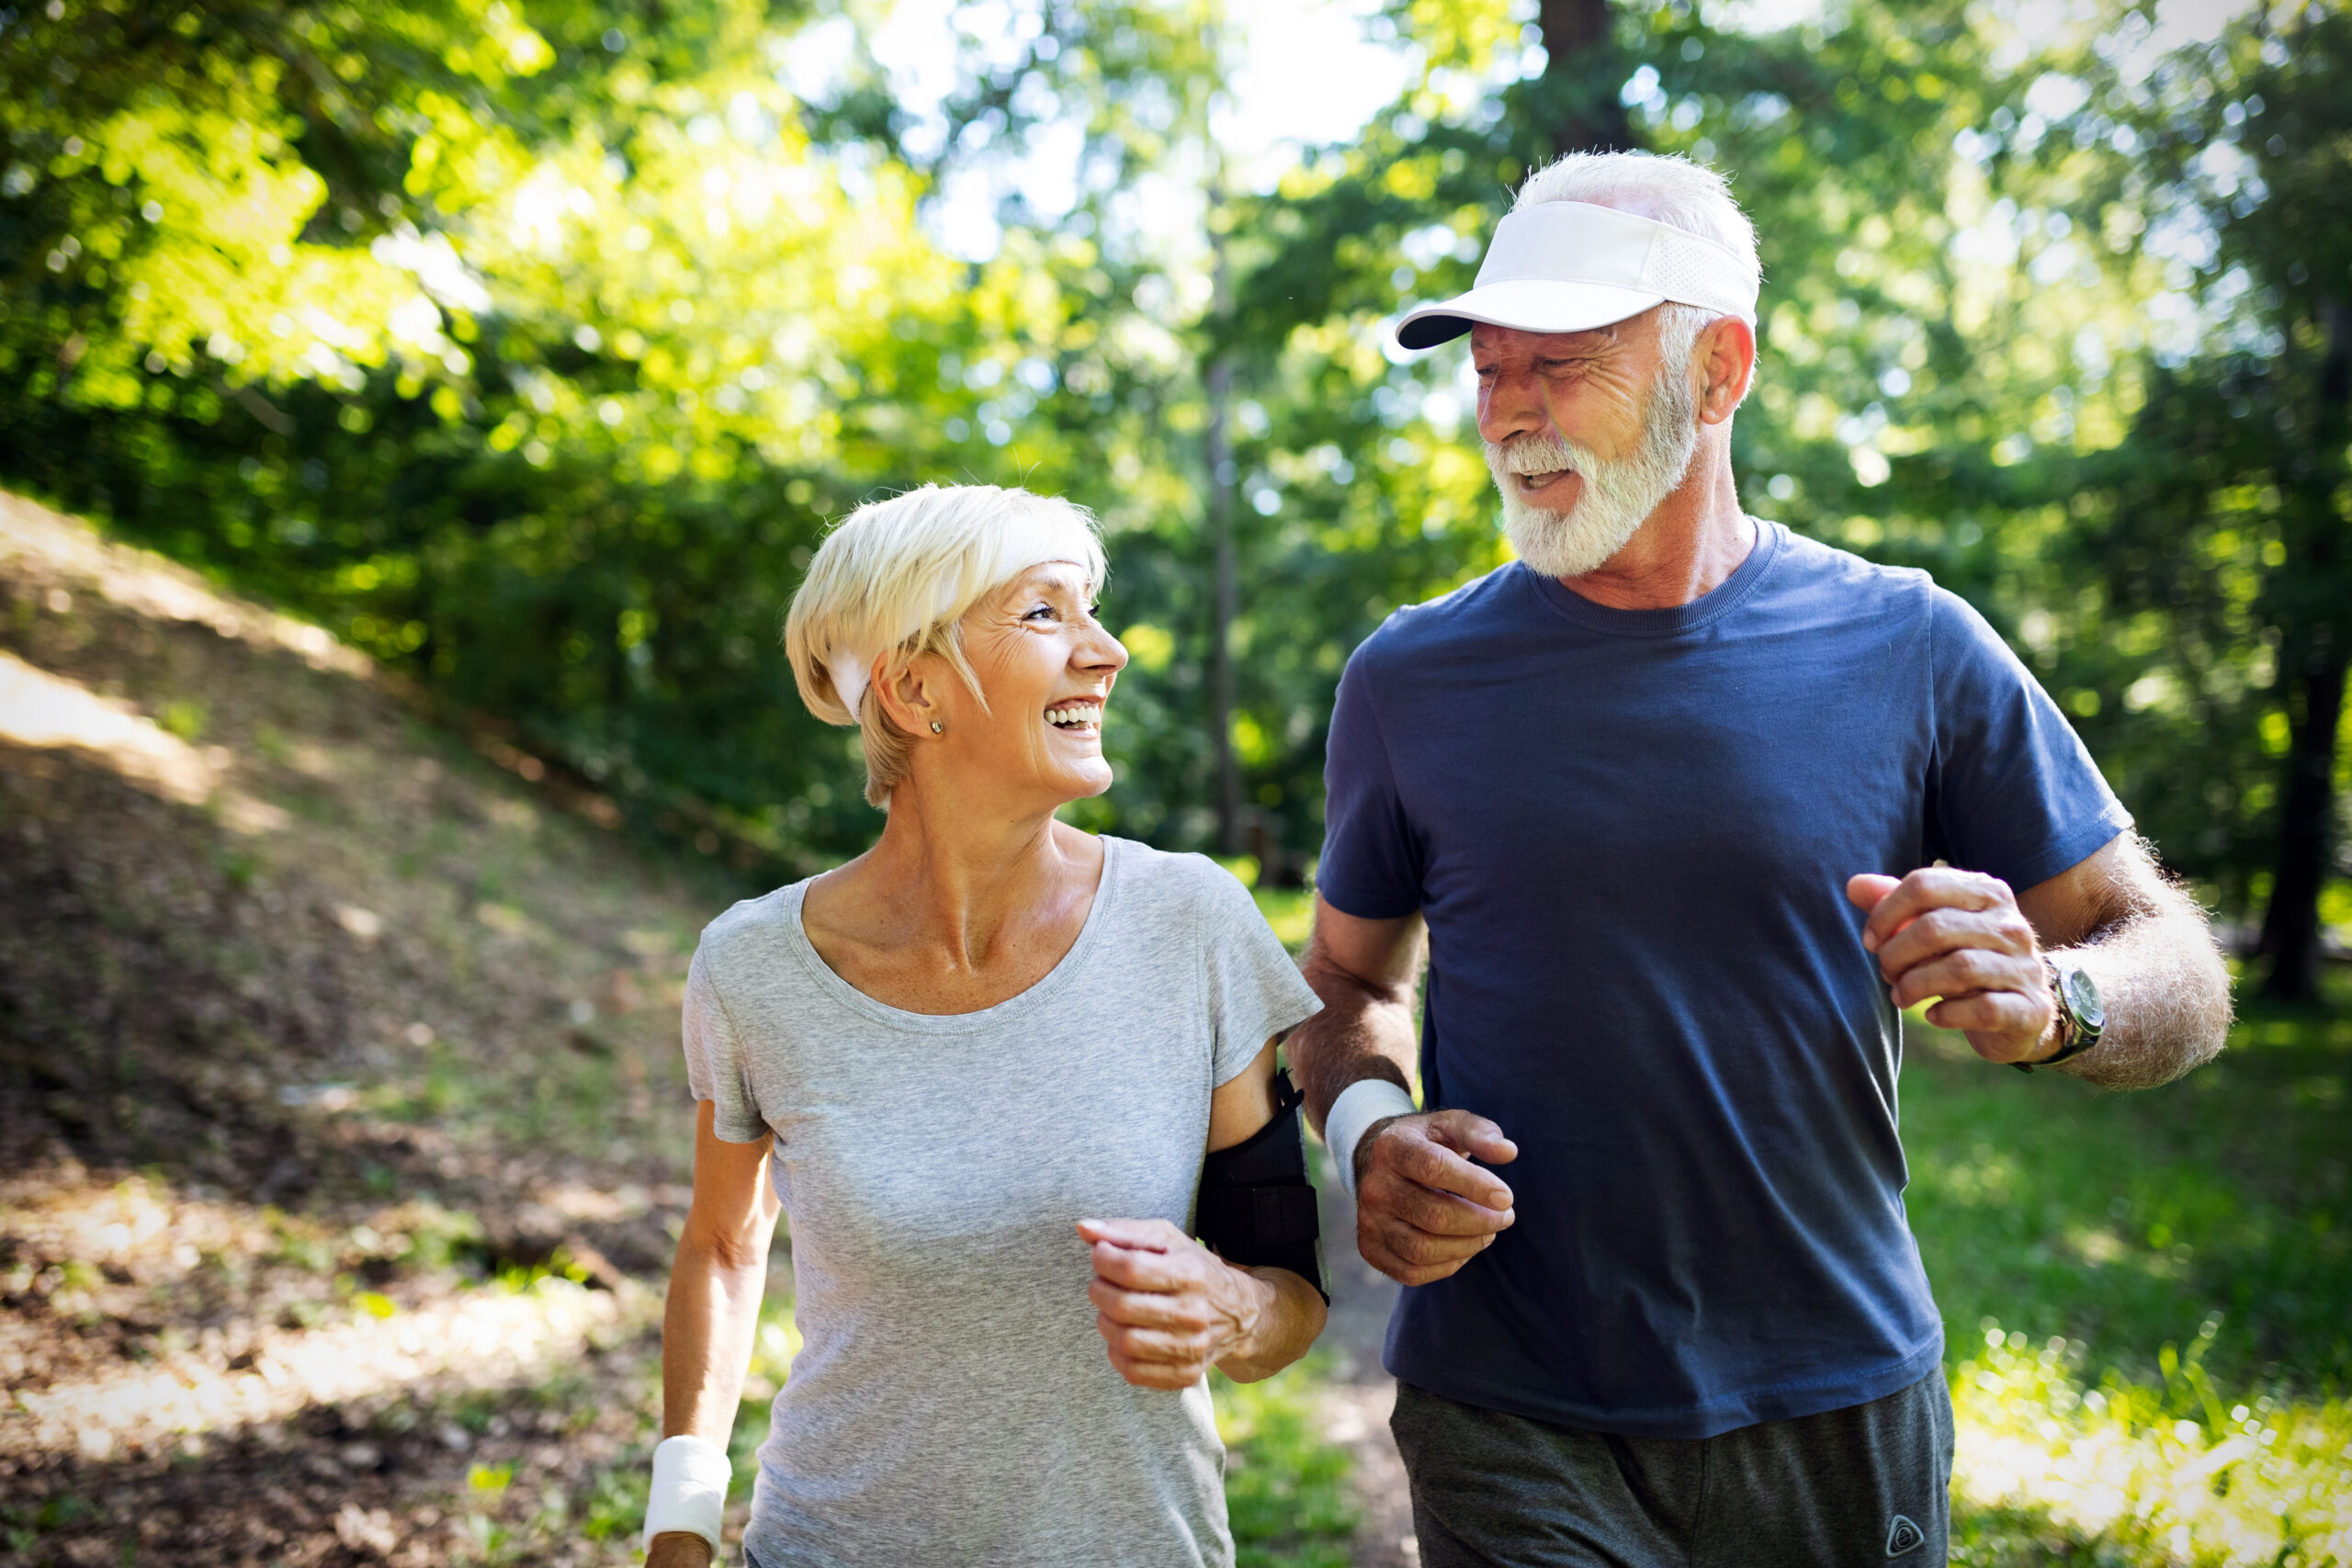 Effects of Exercise on Memory Loss